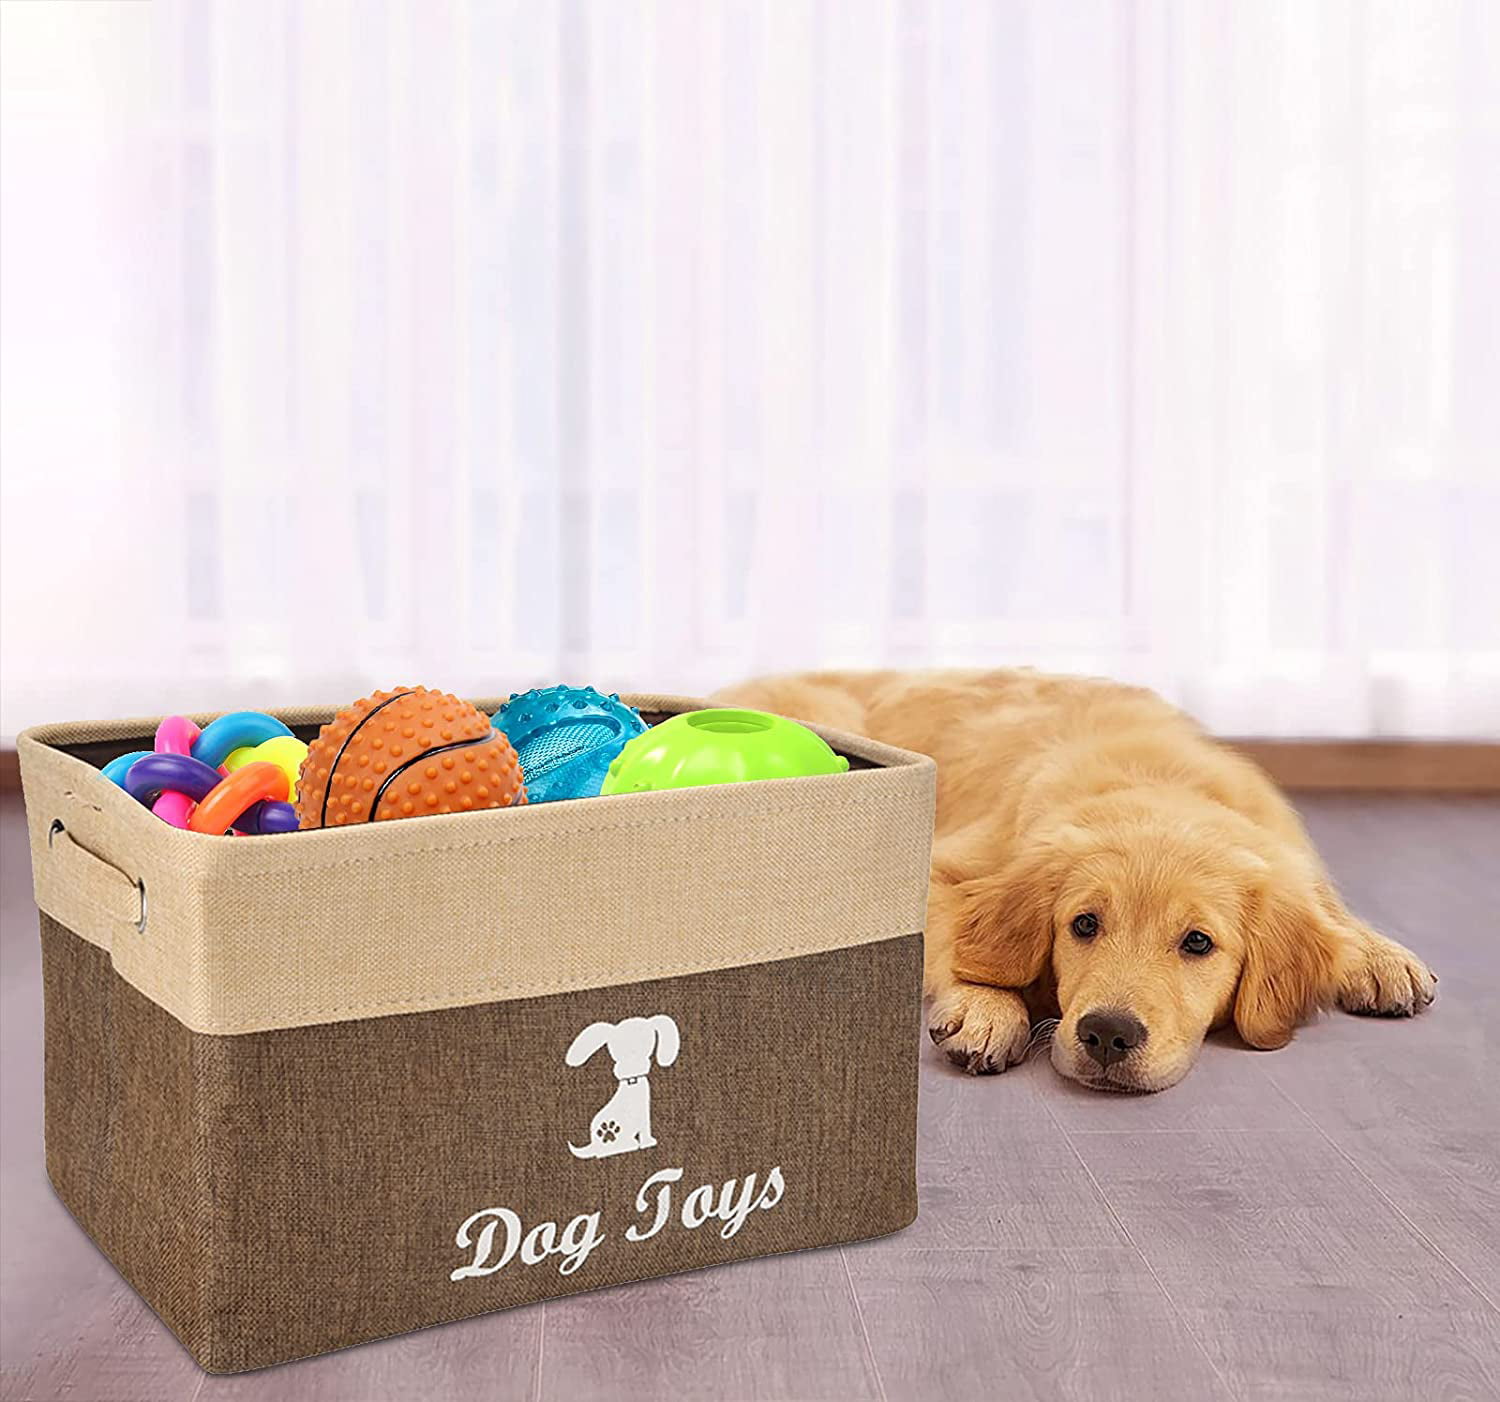 Vest and Dog Chew Toys Basket Chest Organizer with Handles for Organizing Pet Cat Toys Pet Toy and Accessory Storage Bin Blankets blue-16x12x8 in 